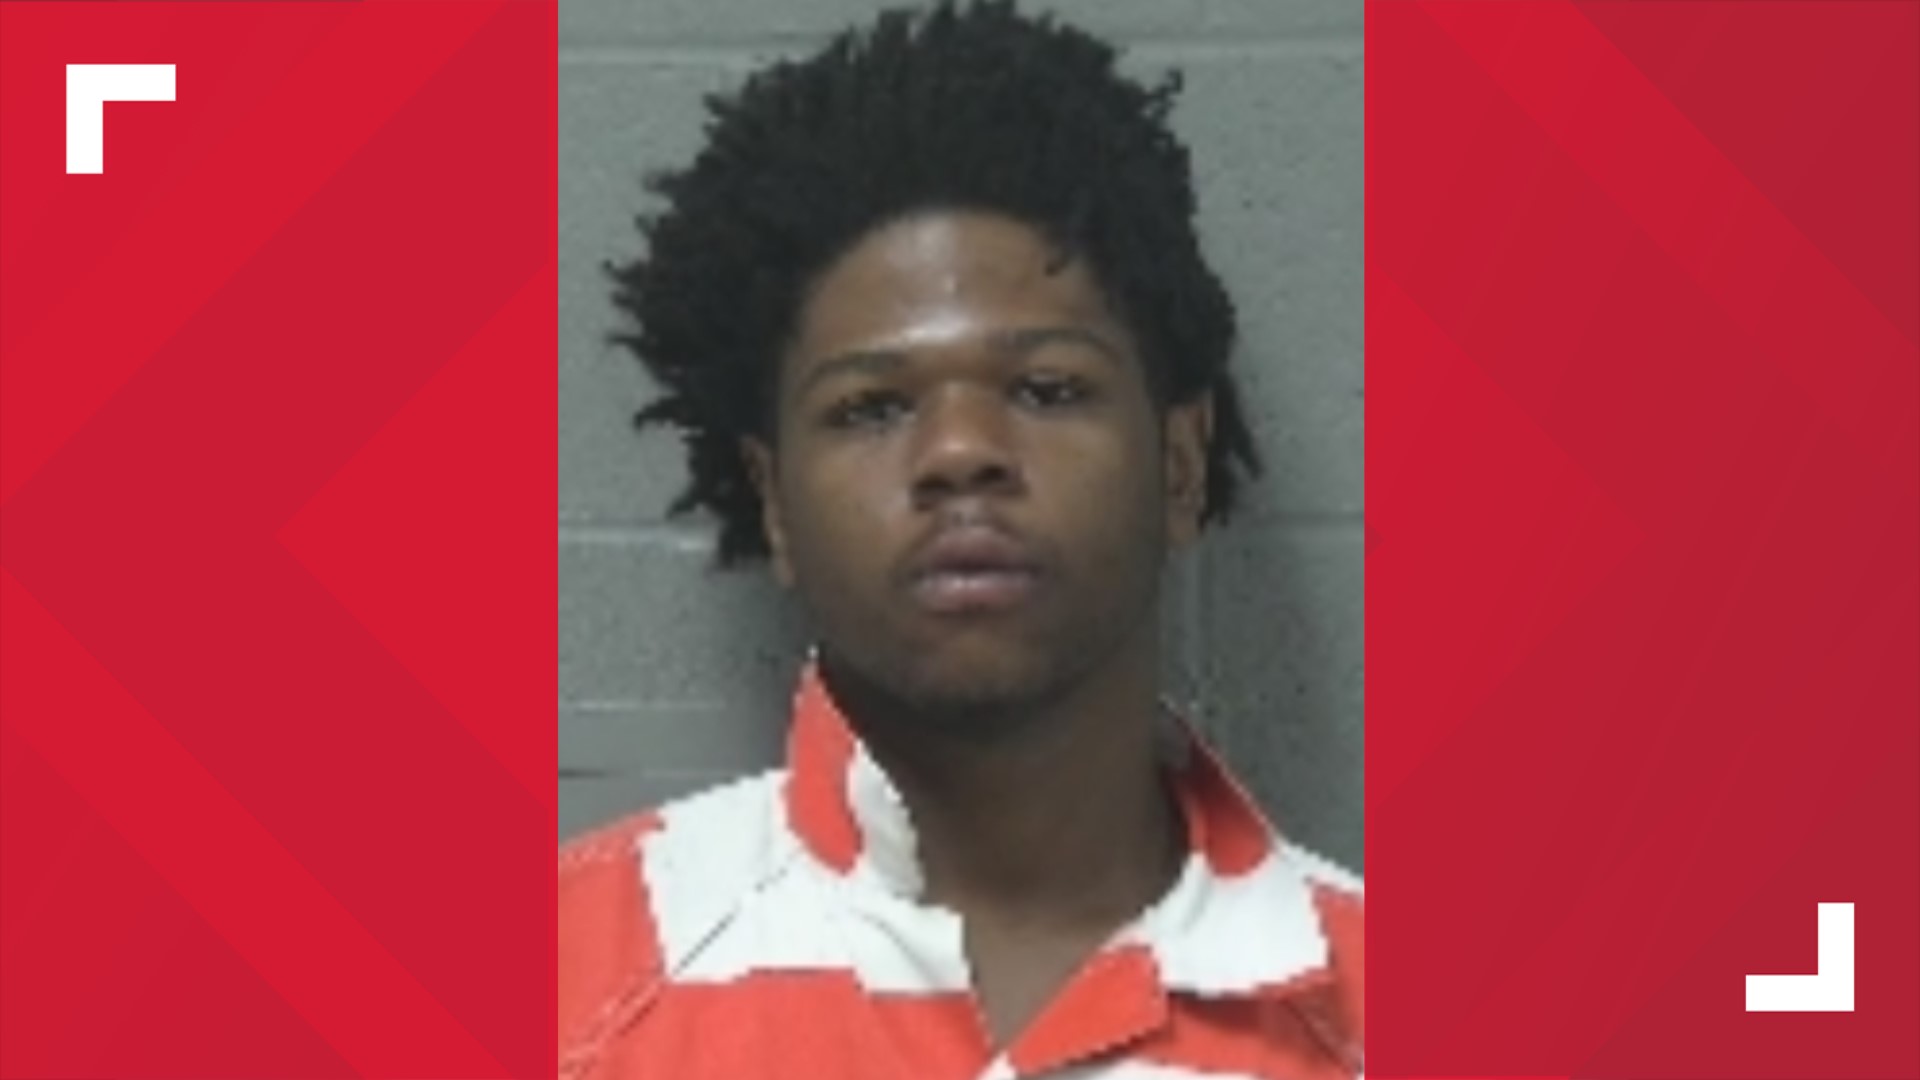 Deanthony Harris was arraigned and taken to the Richland County Jail where he is being held on a $25,000 bond. He was also charged with failure to comply.